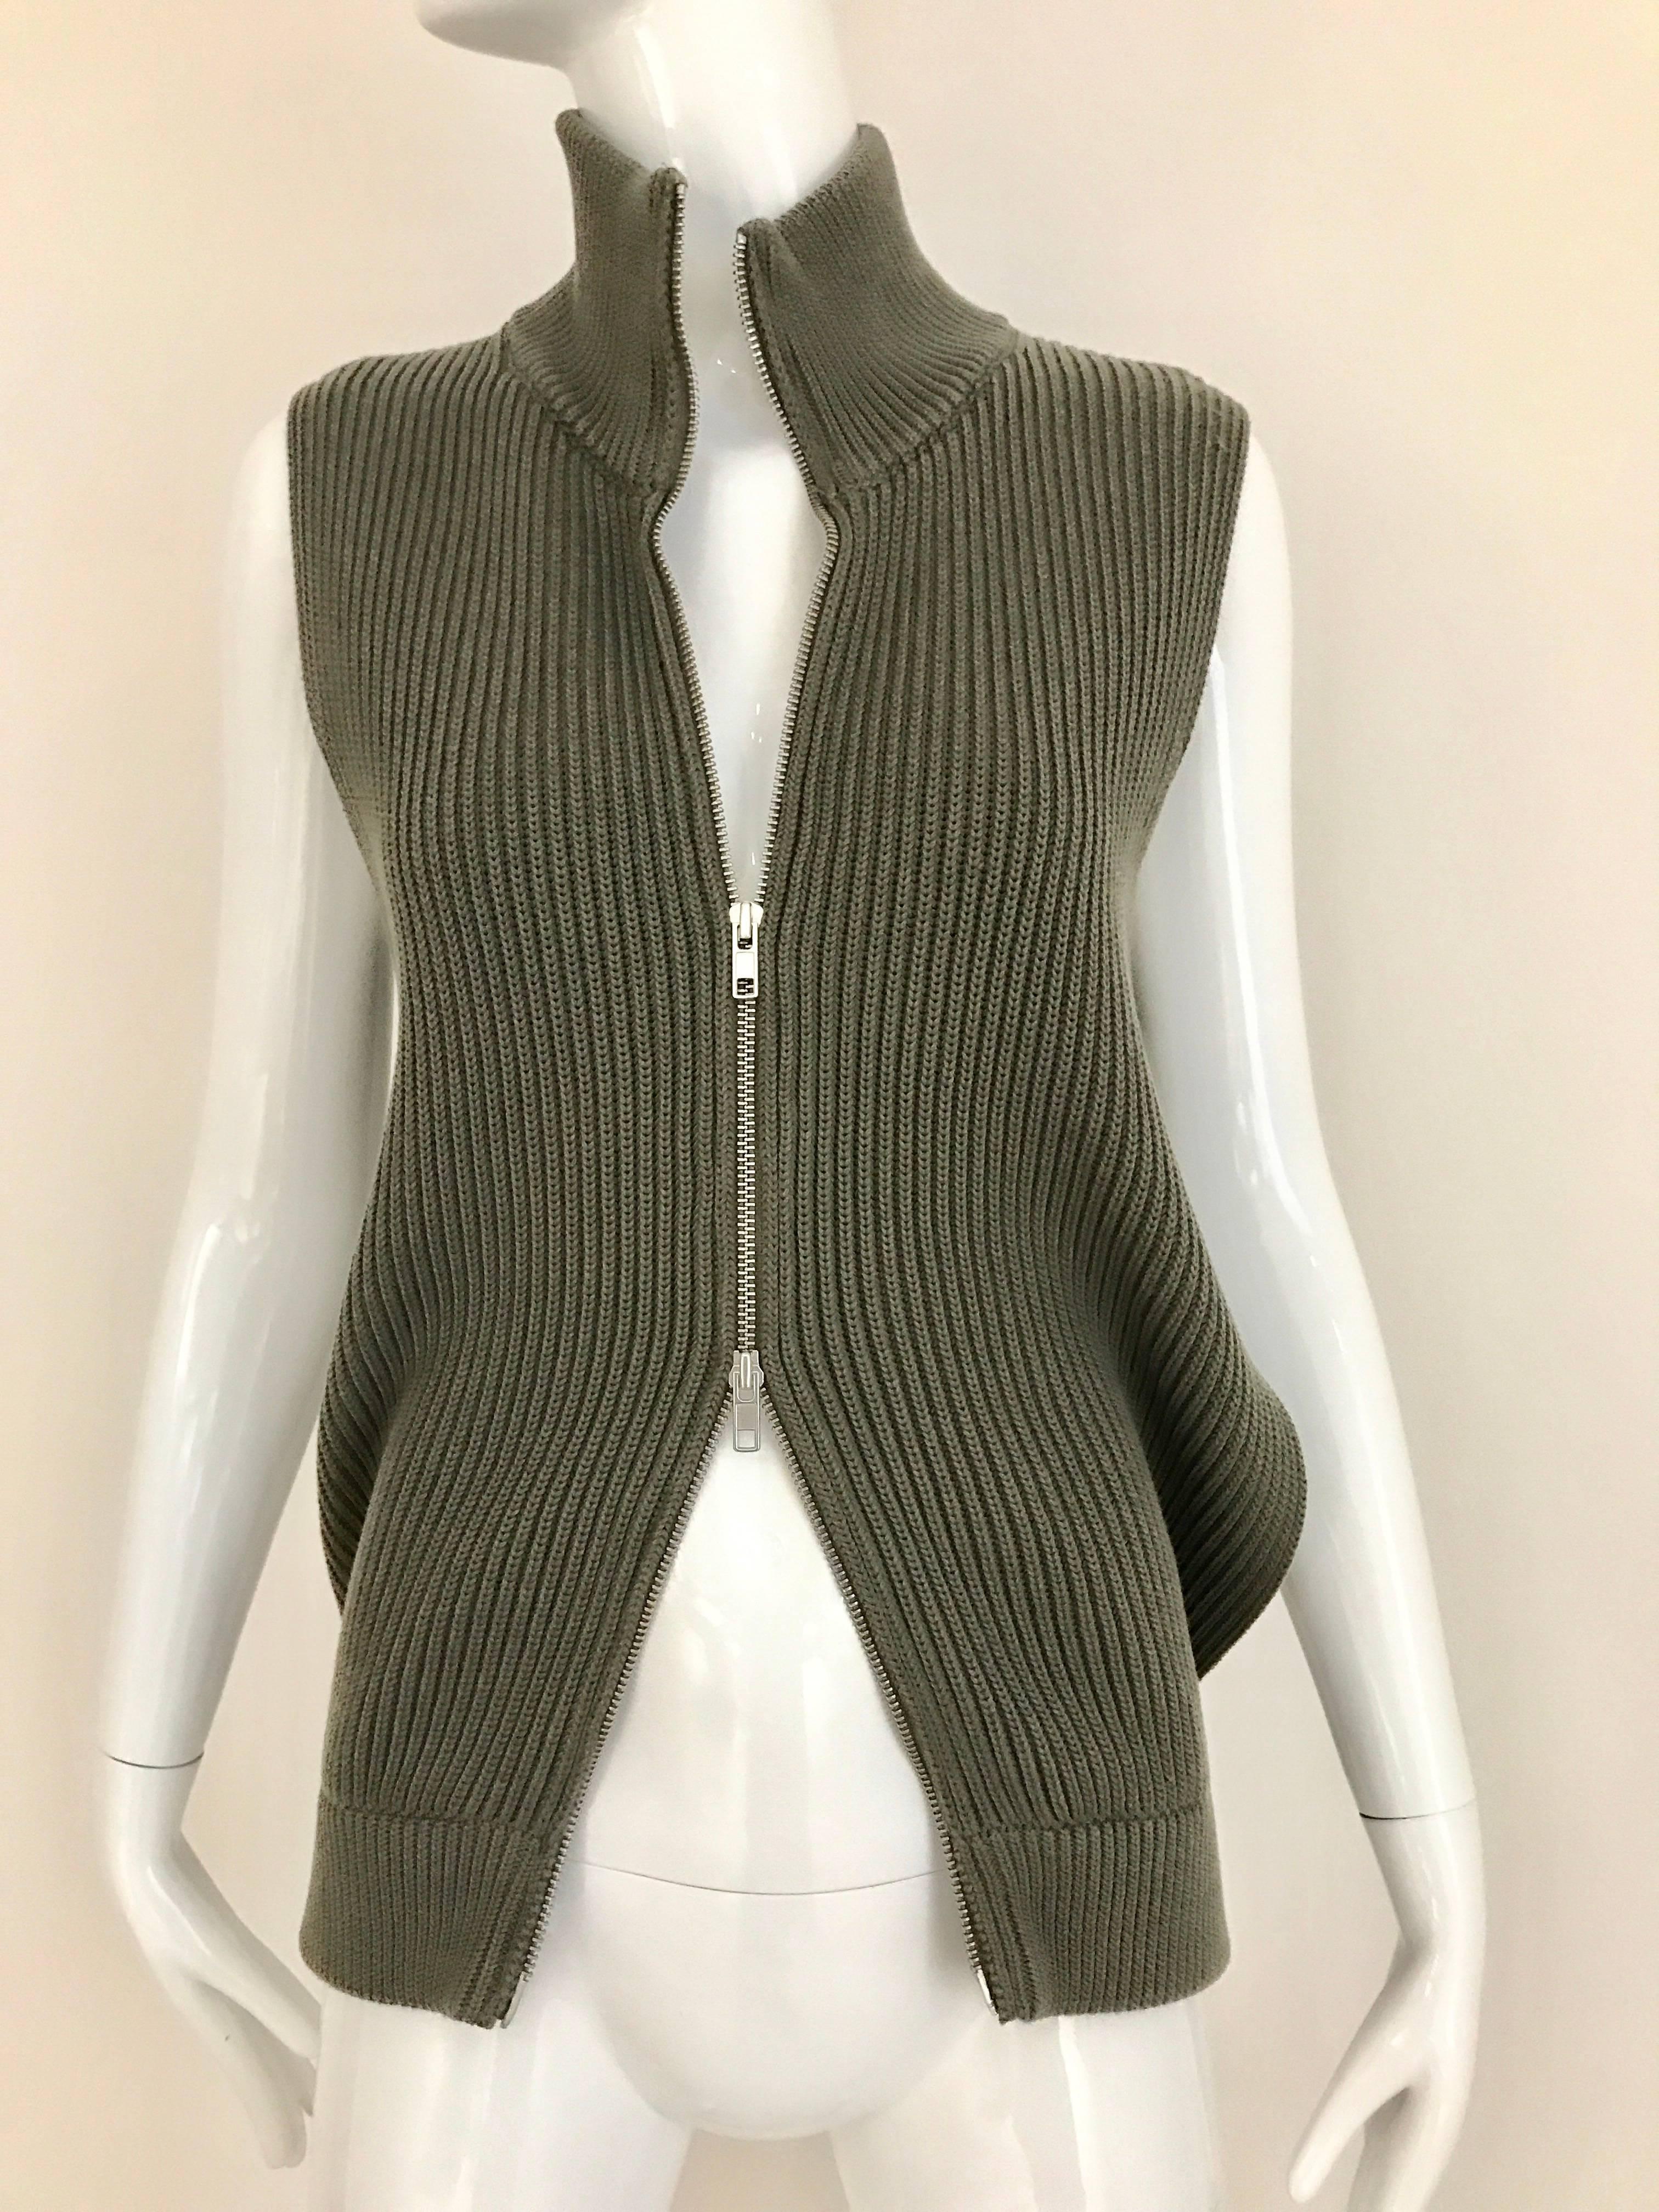 Margiela olive green vest cardigan knit top with double zipper in the front and cut out from the side. 
Bust: 34 inch - 36 inch unzipped
Waist: 30 inch / Vest  front Length: 24 inch - back length 26 inch
